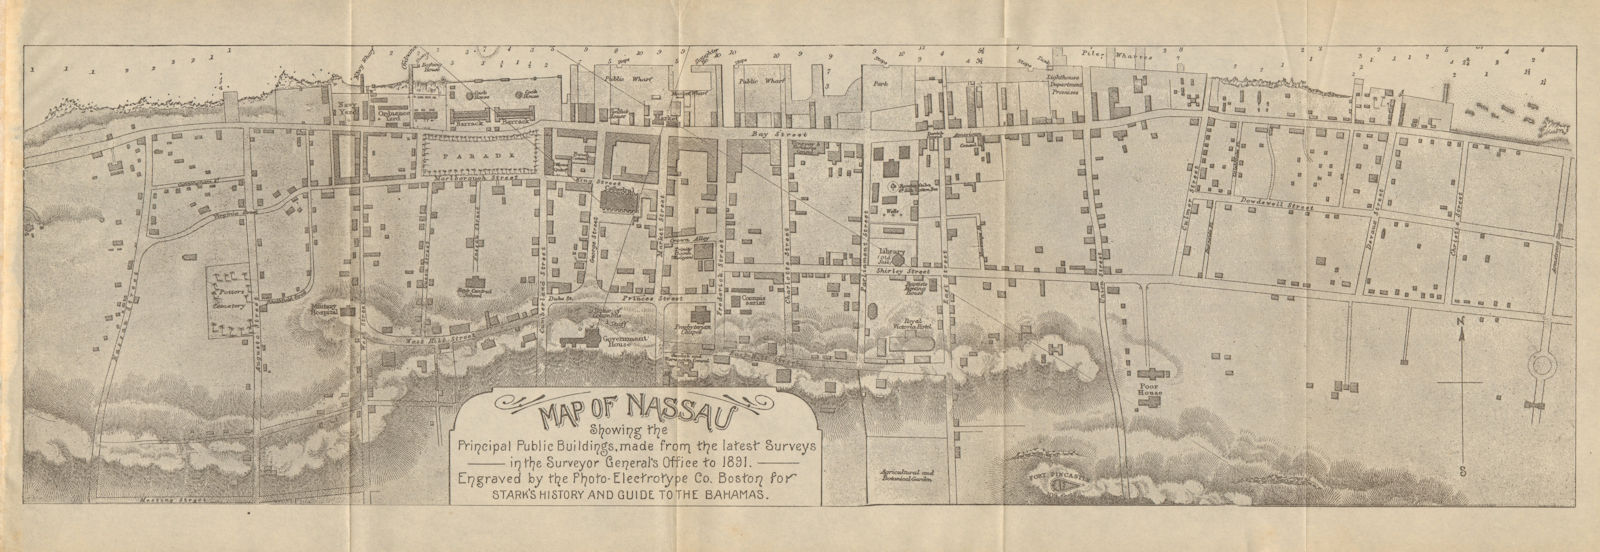 Antique town city plan of NASSAU, BAHAMAS by Stark 1891 old map chart